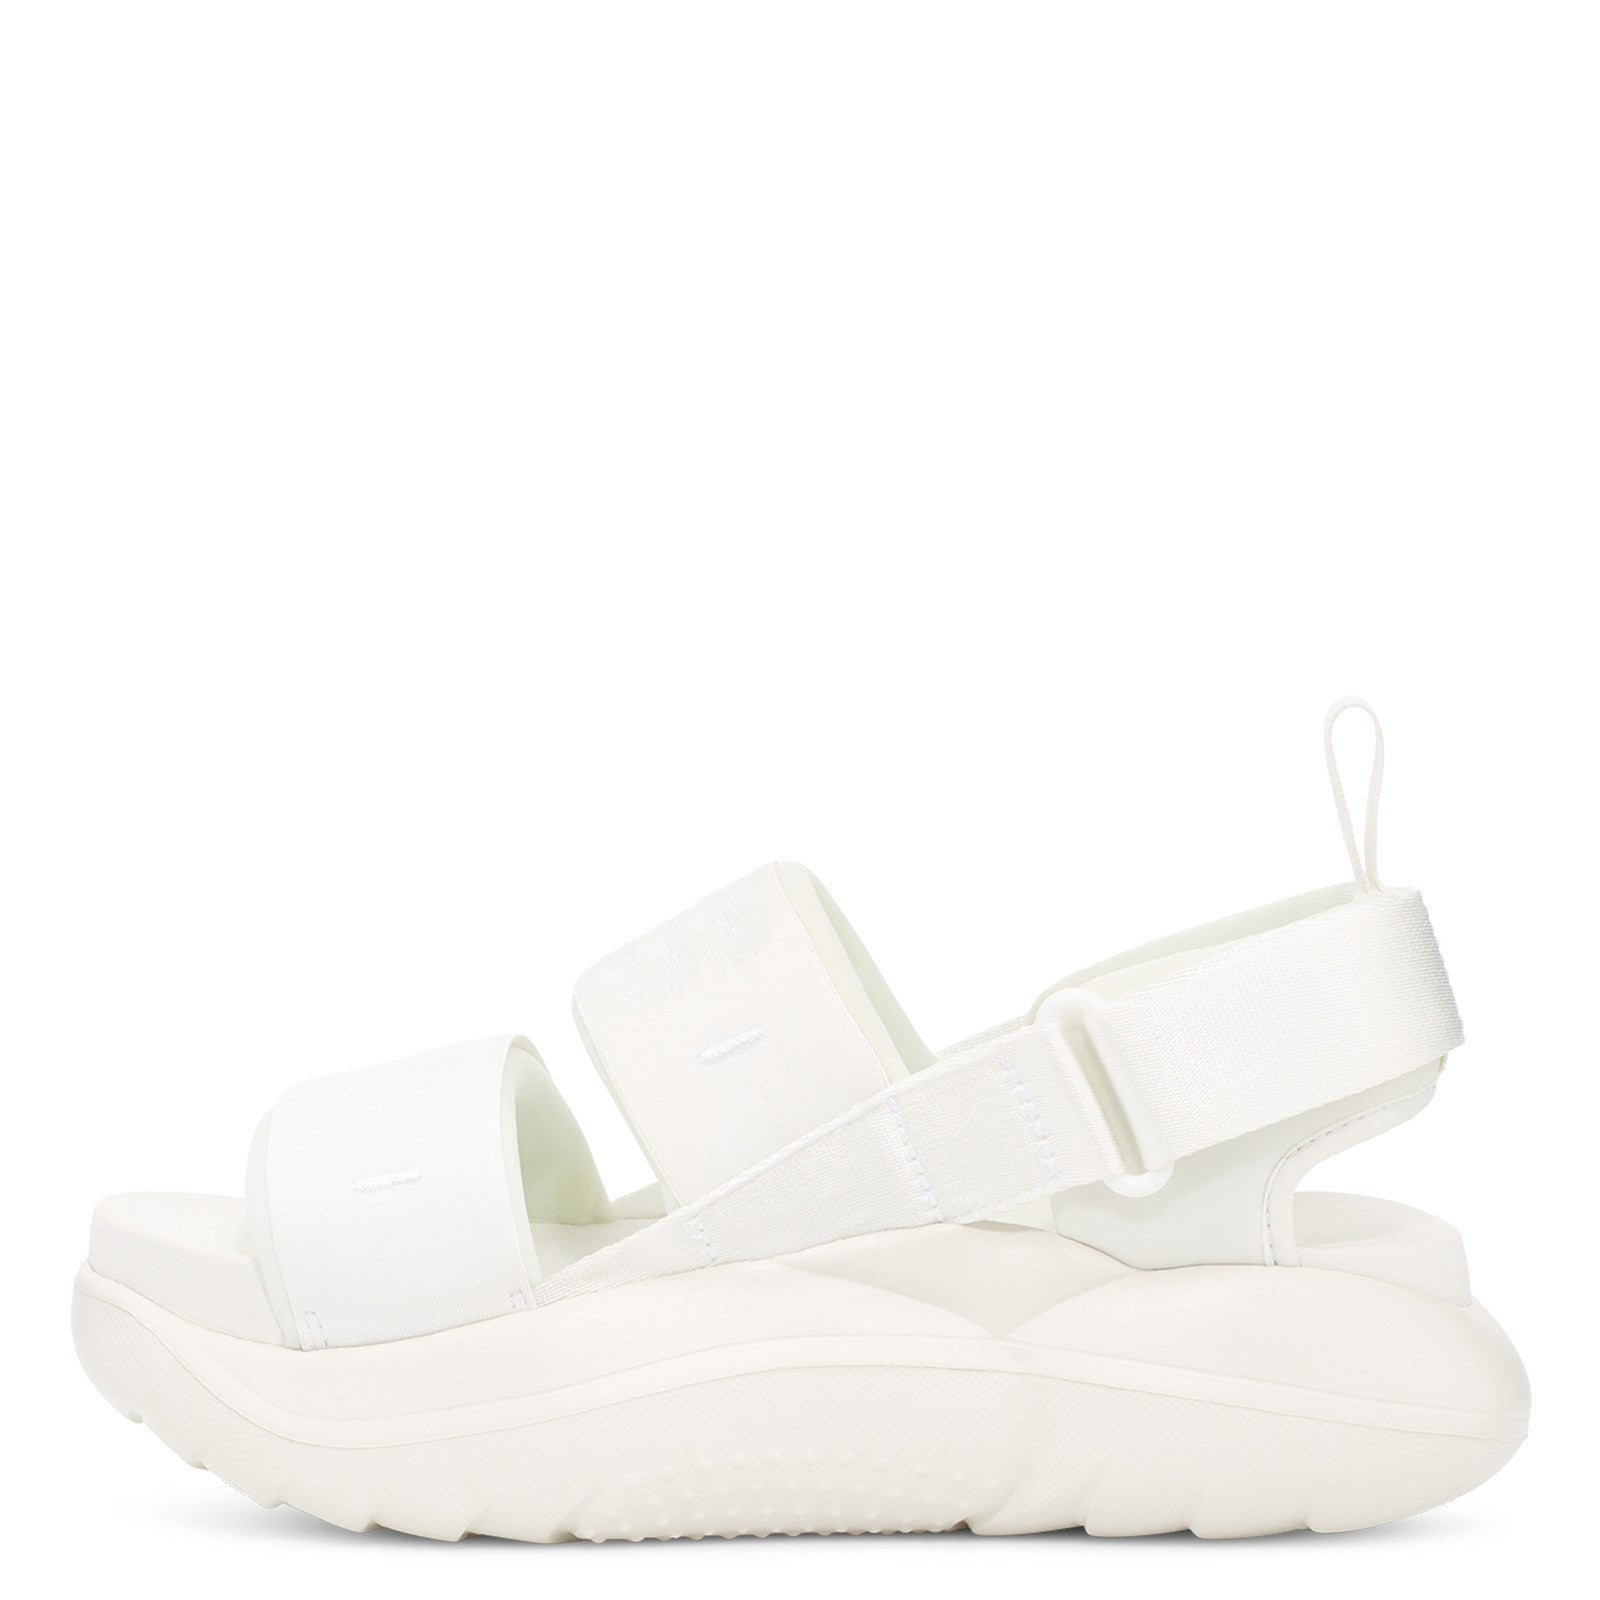 Medial view of the Women's LA Cloud Sport sandal by UGG in the color white